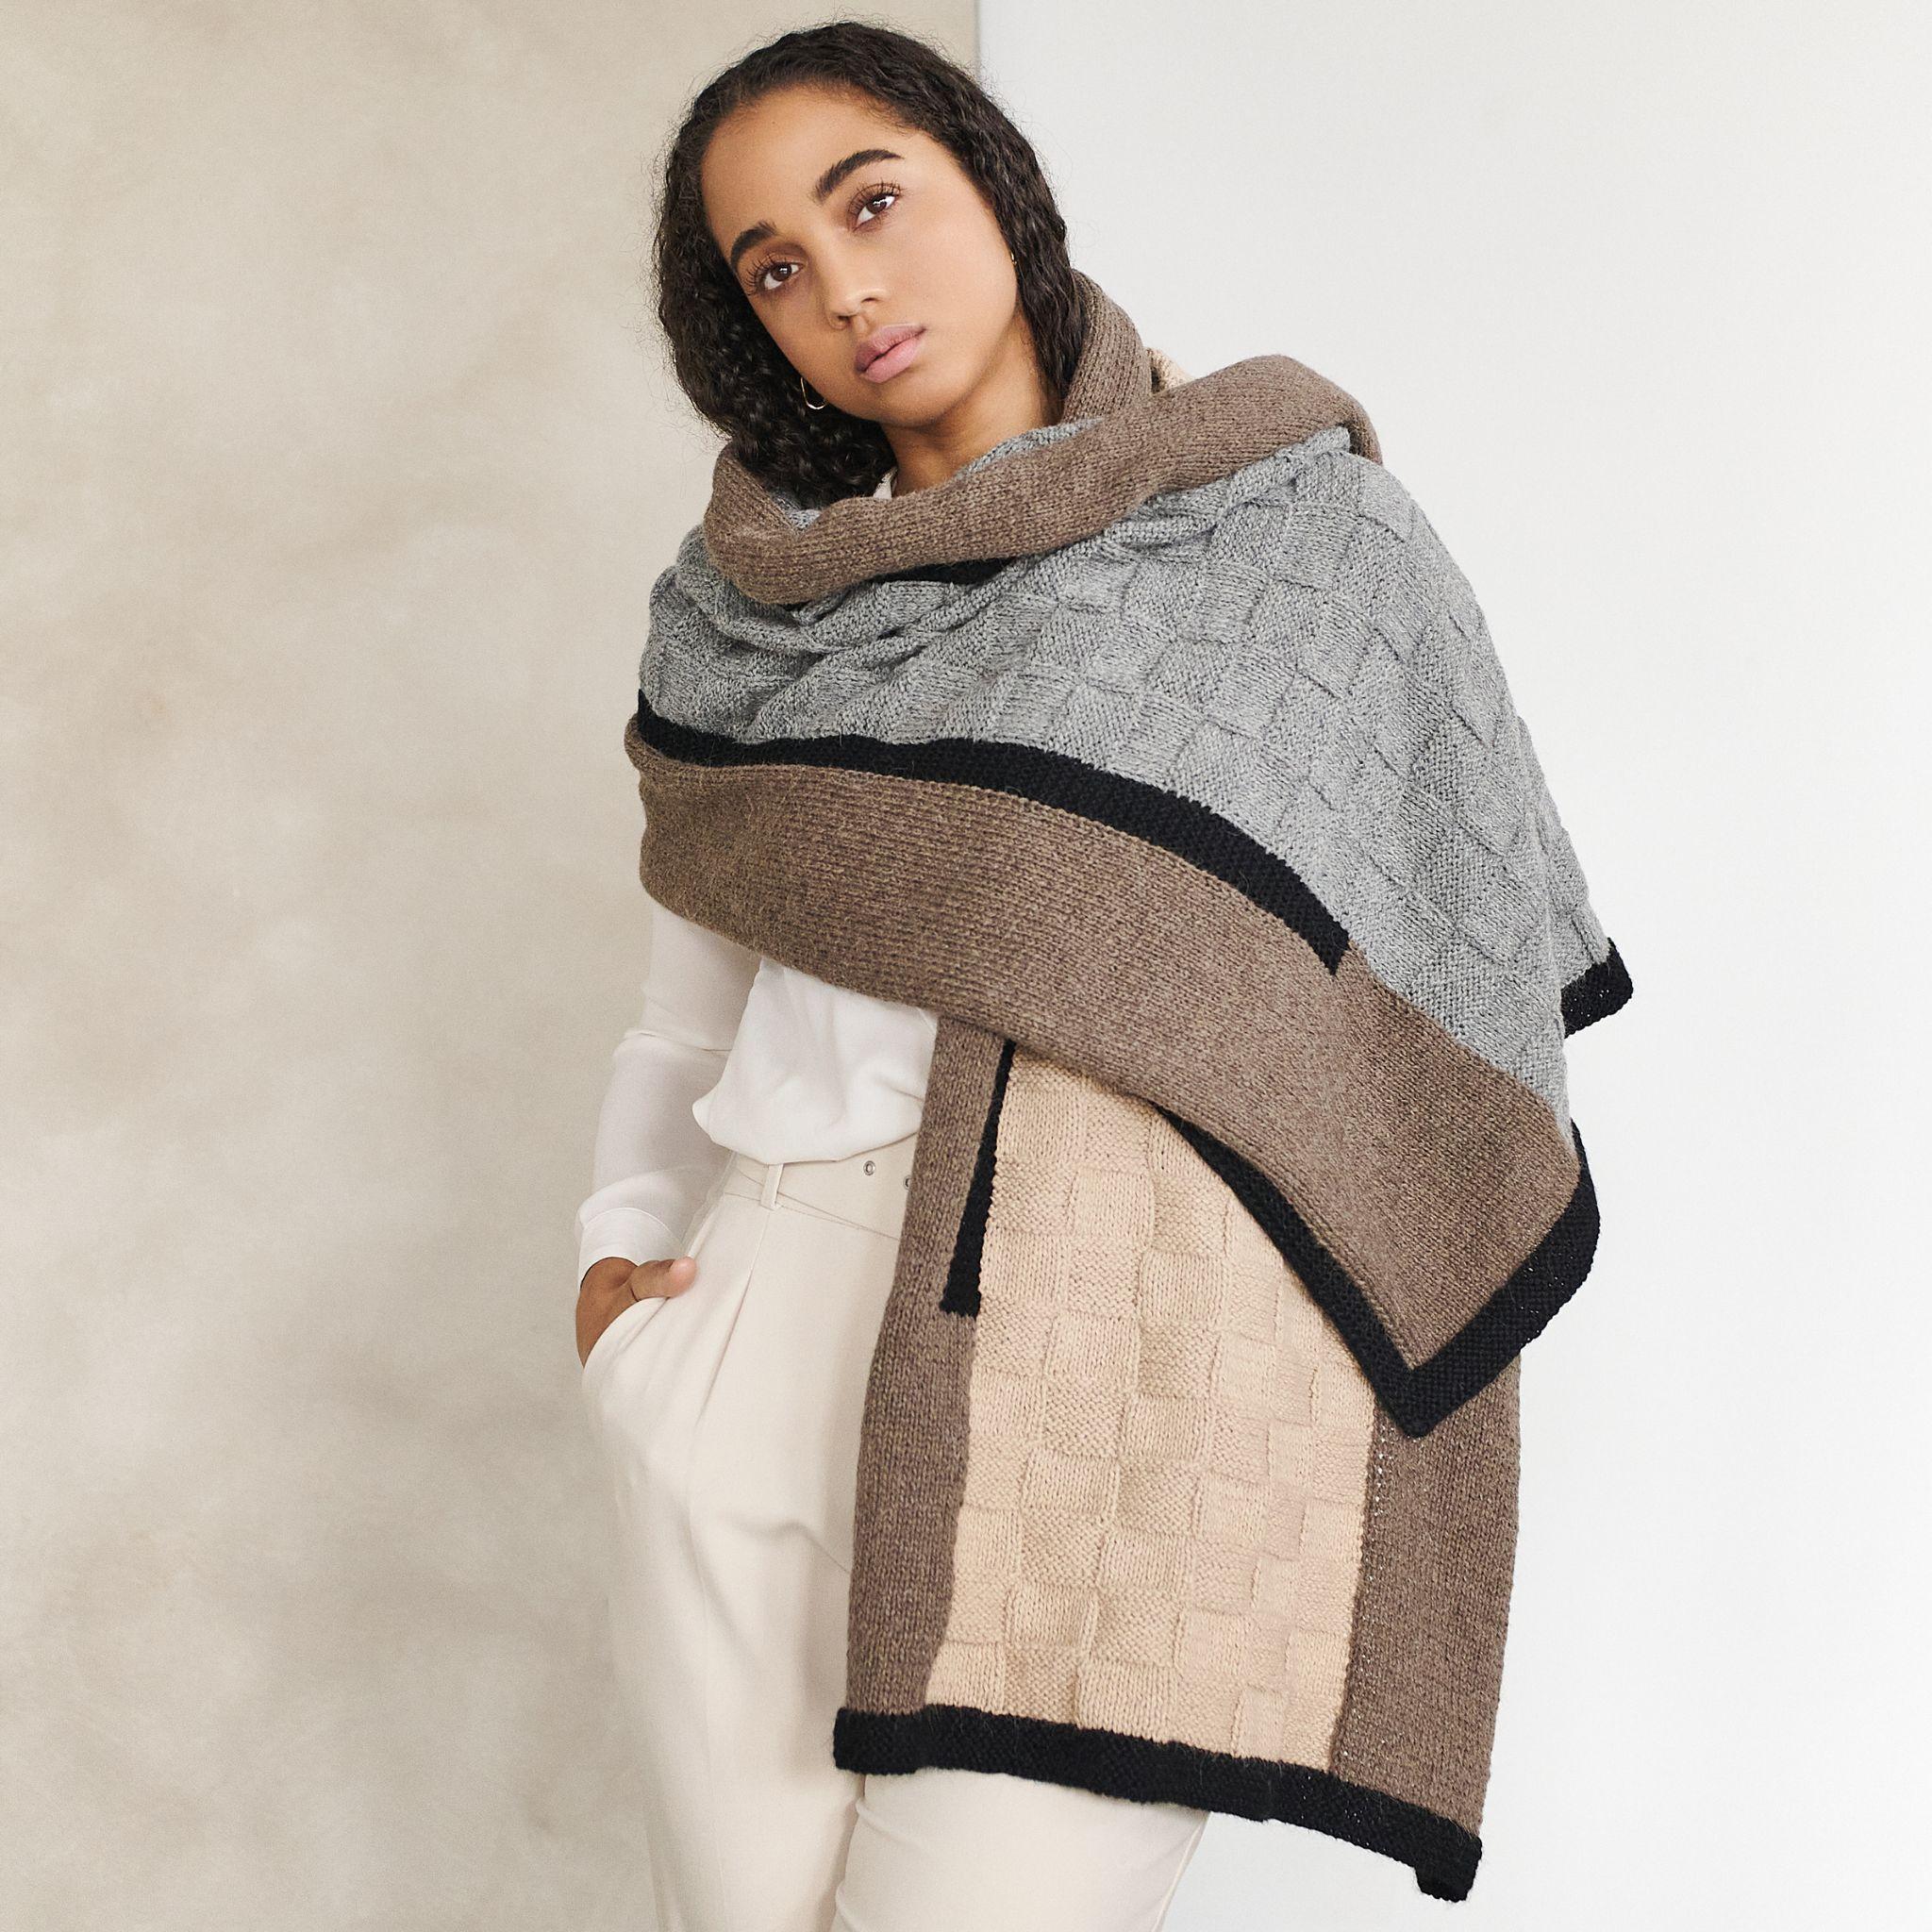 Muhu is a fruit of an intentional collaboration with an artisan cluster in Peru. Hand knitted only by women, these artisans are trained specially to develop this classic design by Studio Variously.

Pure softest alpaca from Peru ( oeko tex certified